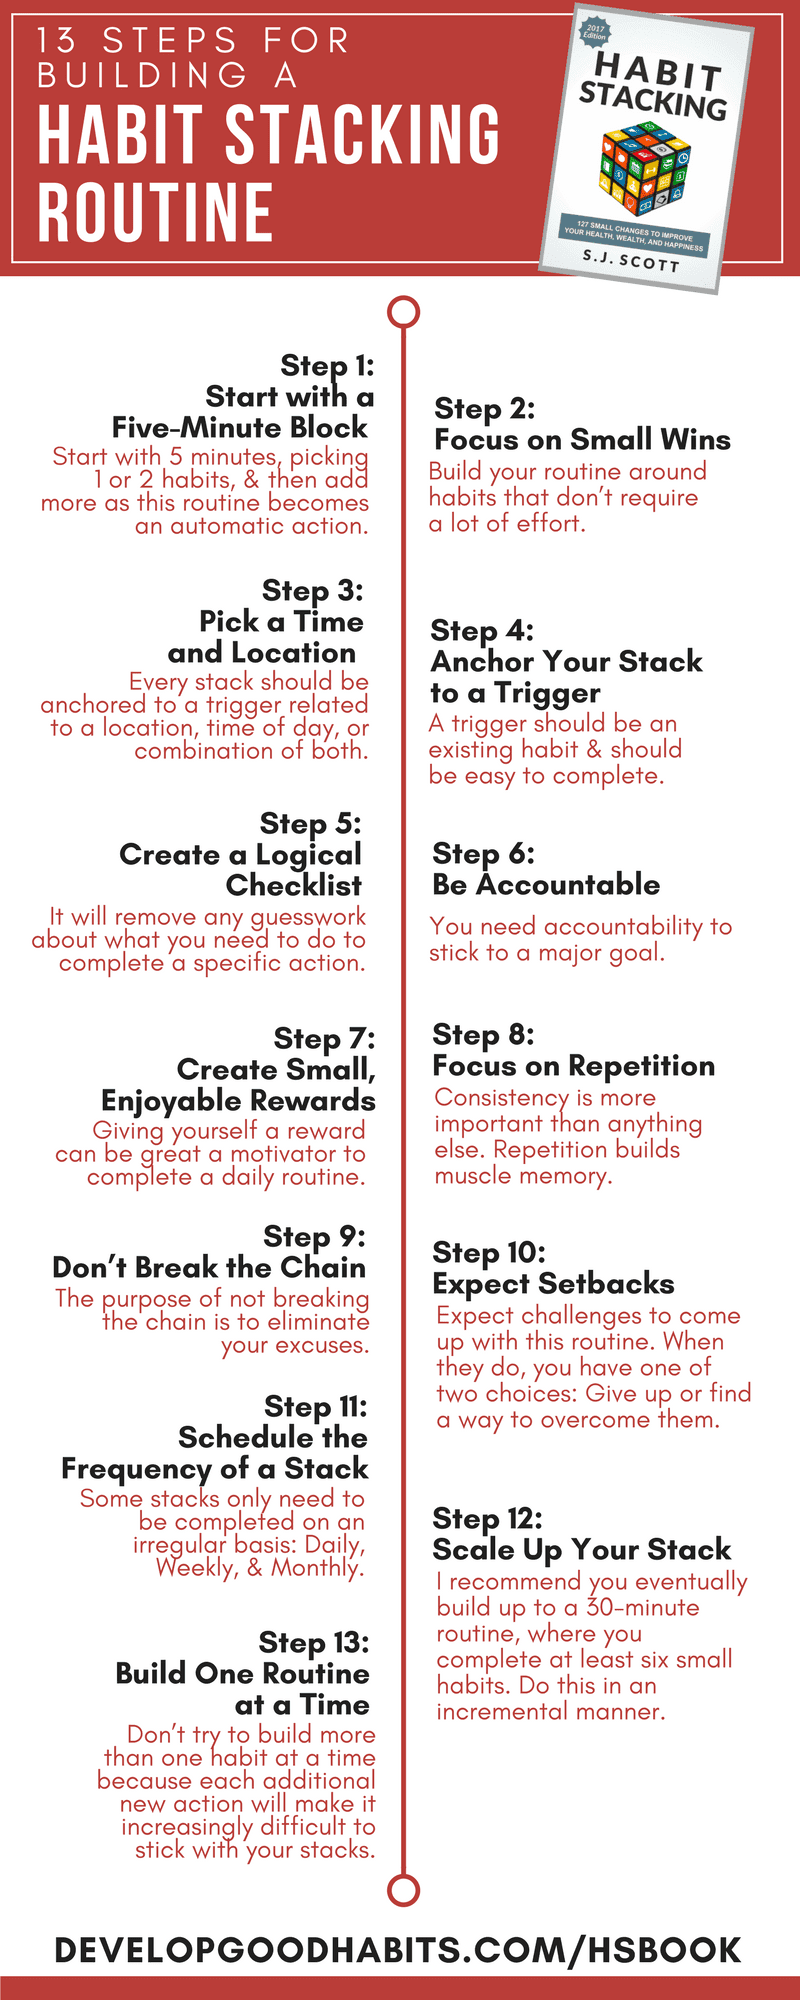 If you follow this habit stacking blueprint, you can identify those important small actions, put them into a logical framework, and then complete each one with a single trigger or cue.